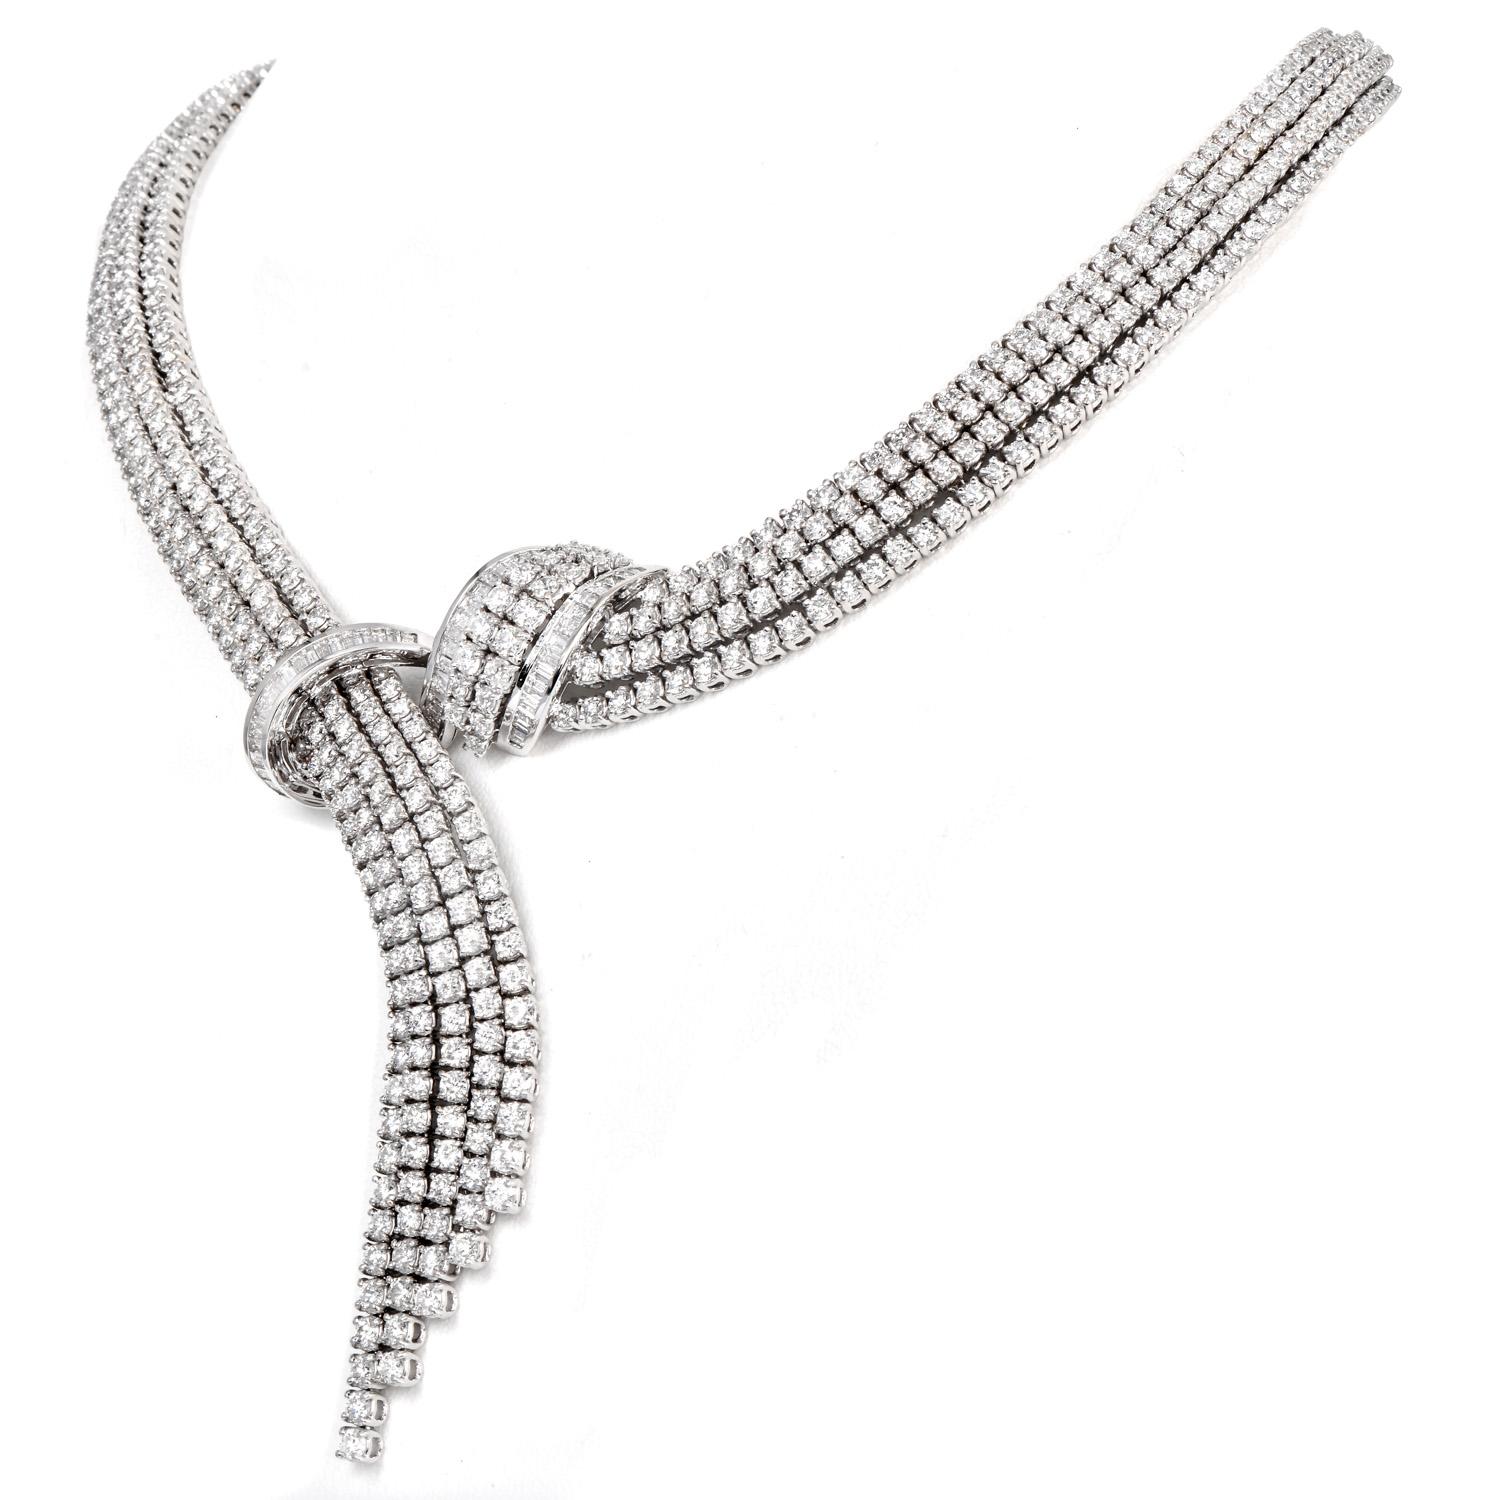 A magnificent necklace is an absolute showstopper and red carpet glamour, perfect for a couture celebrity look. Crafted in exquisite 18K white gold, it features a scarf knot style.

Adorned with sparkling natural diamonds, each prong set to